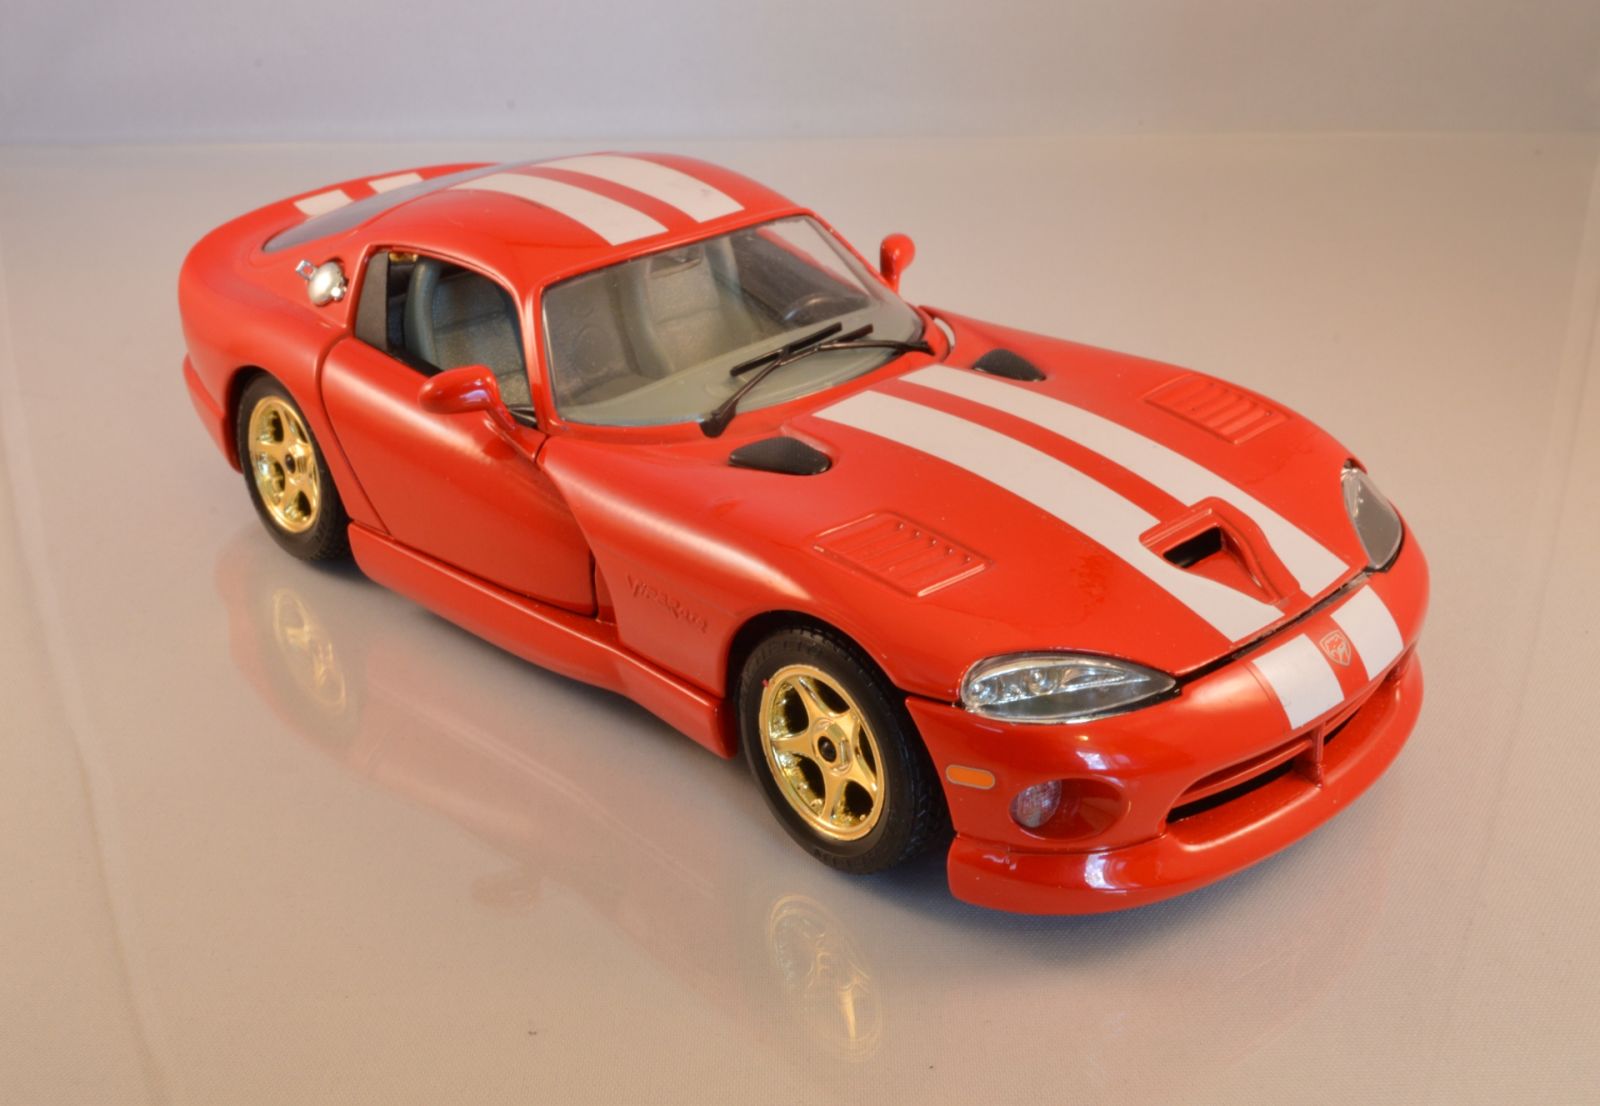 Illustration for article titled My first Bburago - 1997 Viper GTS